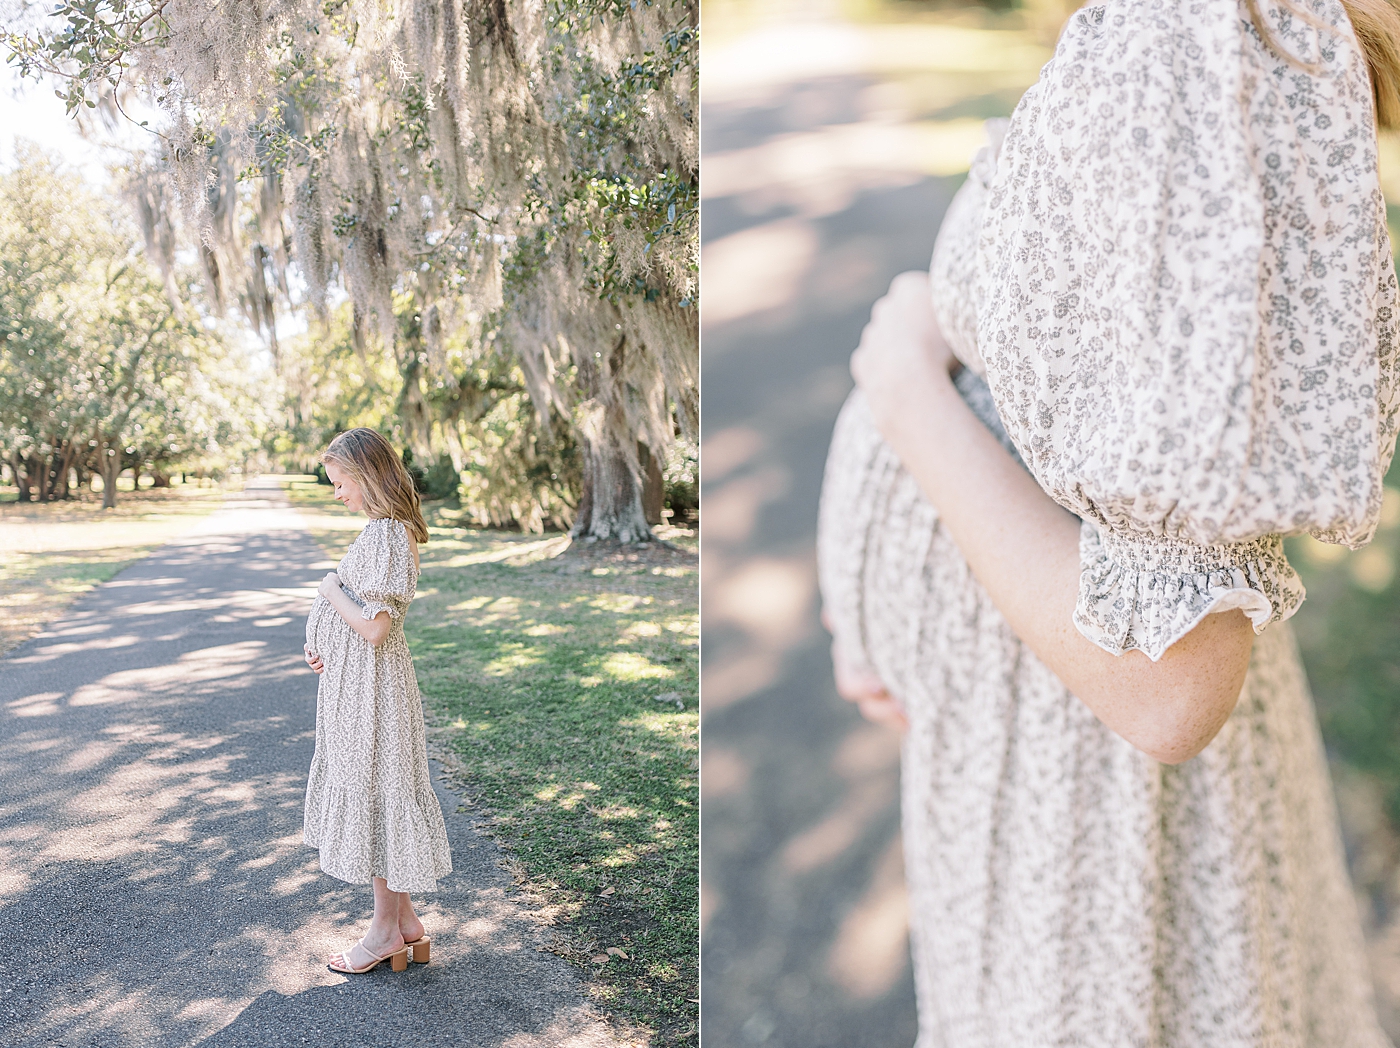 Side-by-side images of details of woman in a spring dress holding her pregnant belly on an oak tree-lined walkway | Image by Caitlyn Motycka Photography